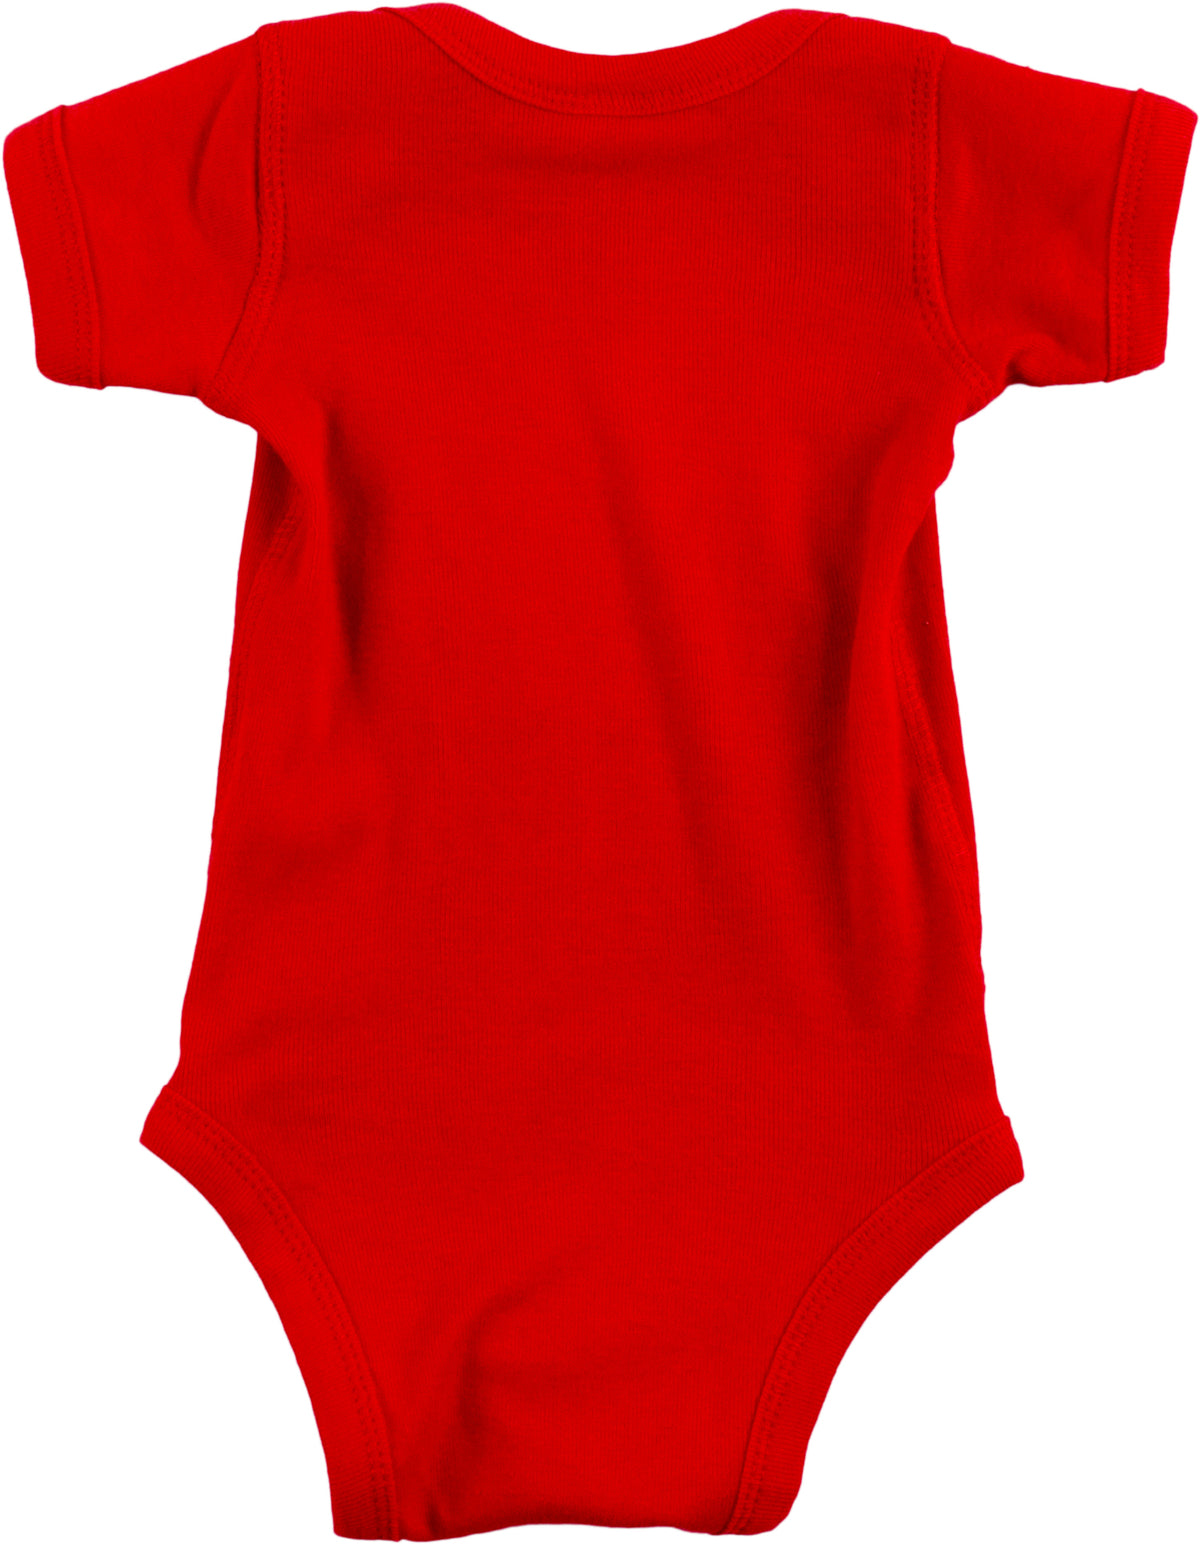 Baby Maple Leaf Jumpsuit | Cute Canadian Infant, Canada Pride One Piece Romper